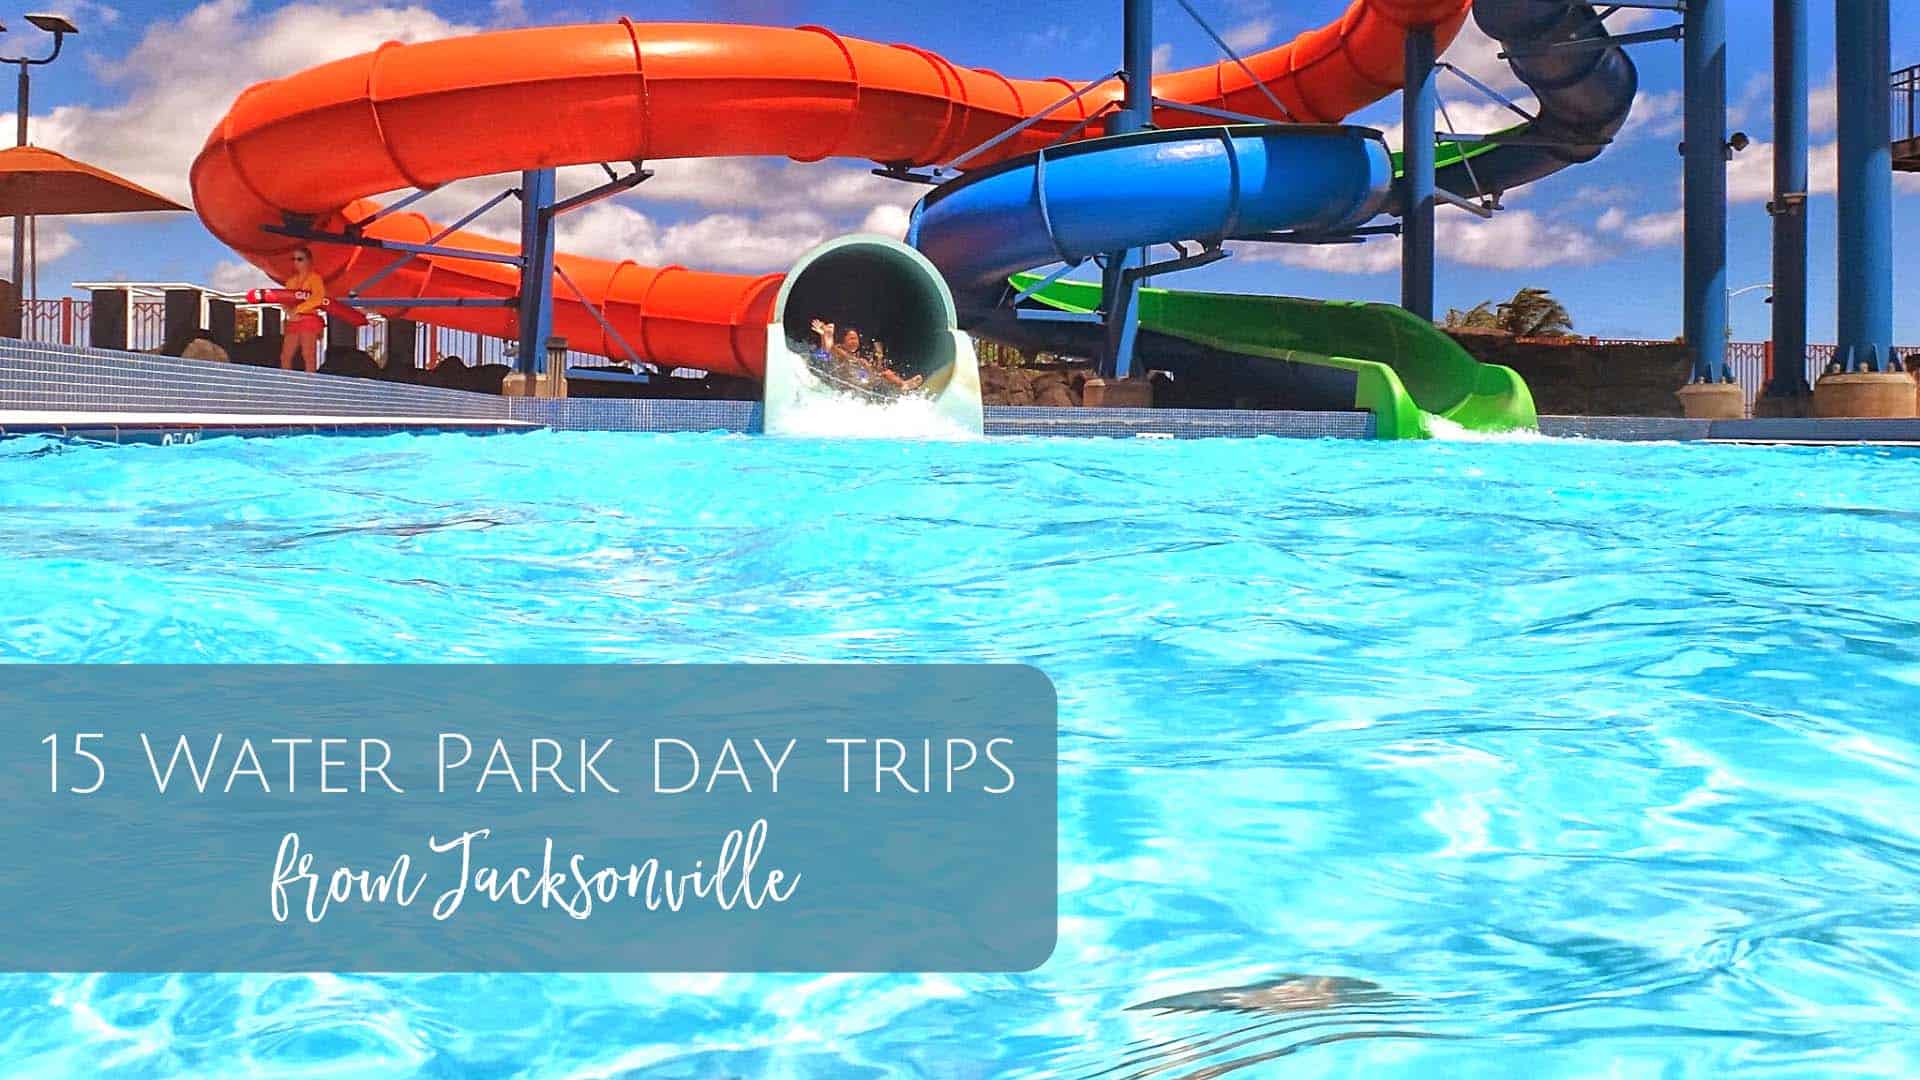 Water Park Day Trips From Jacksonville